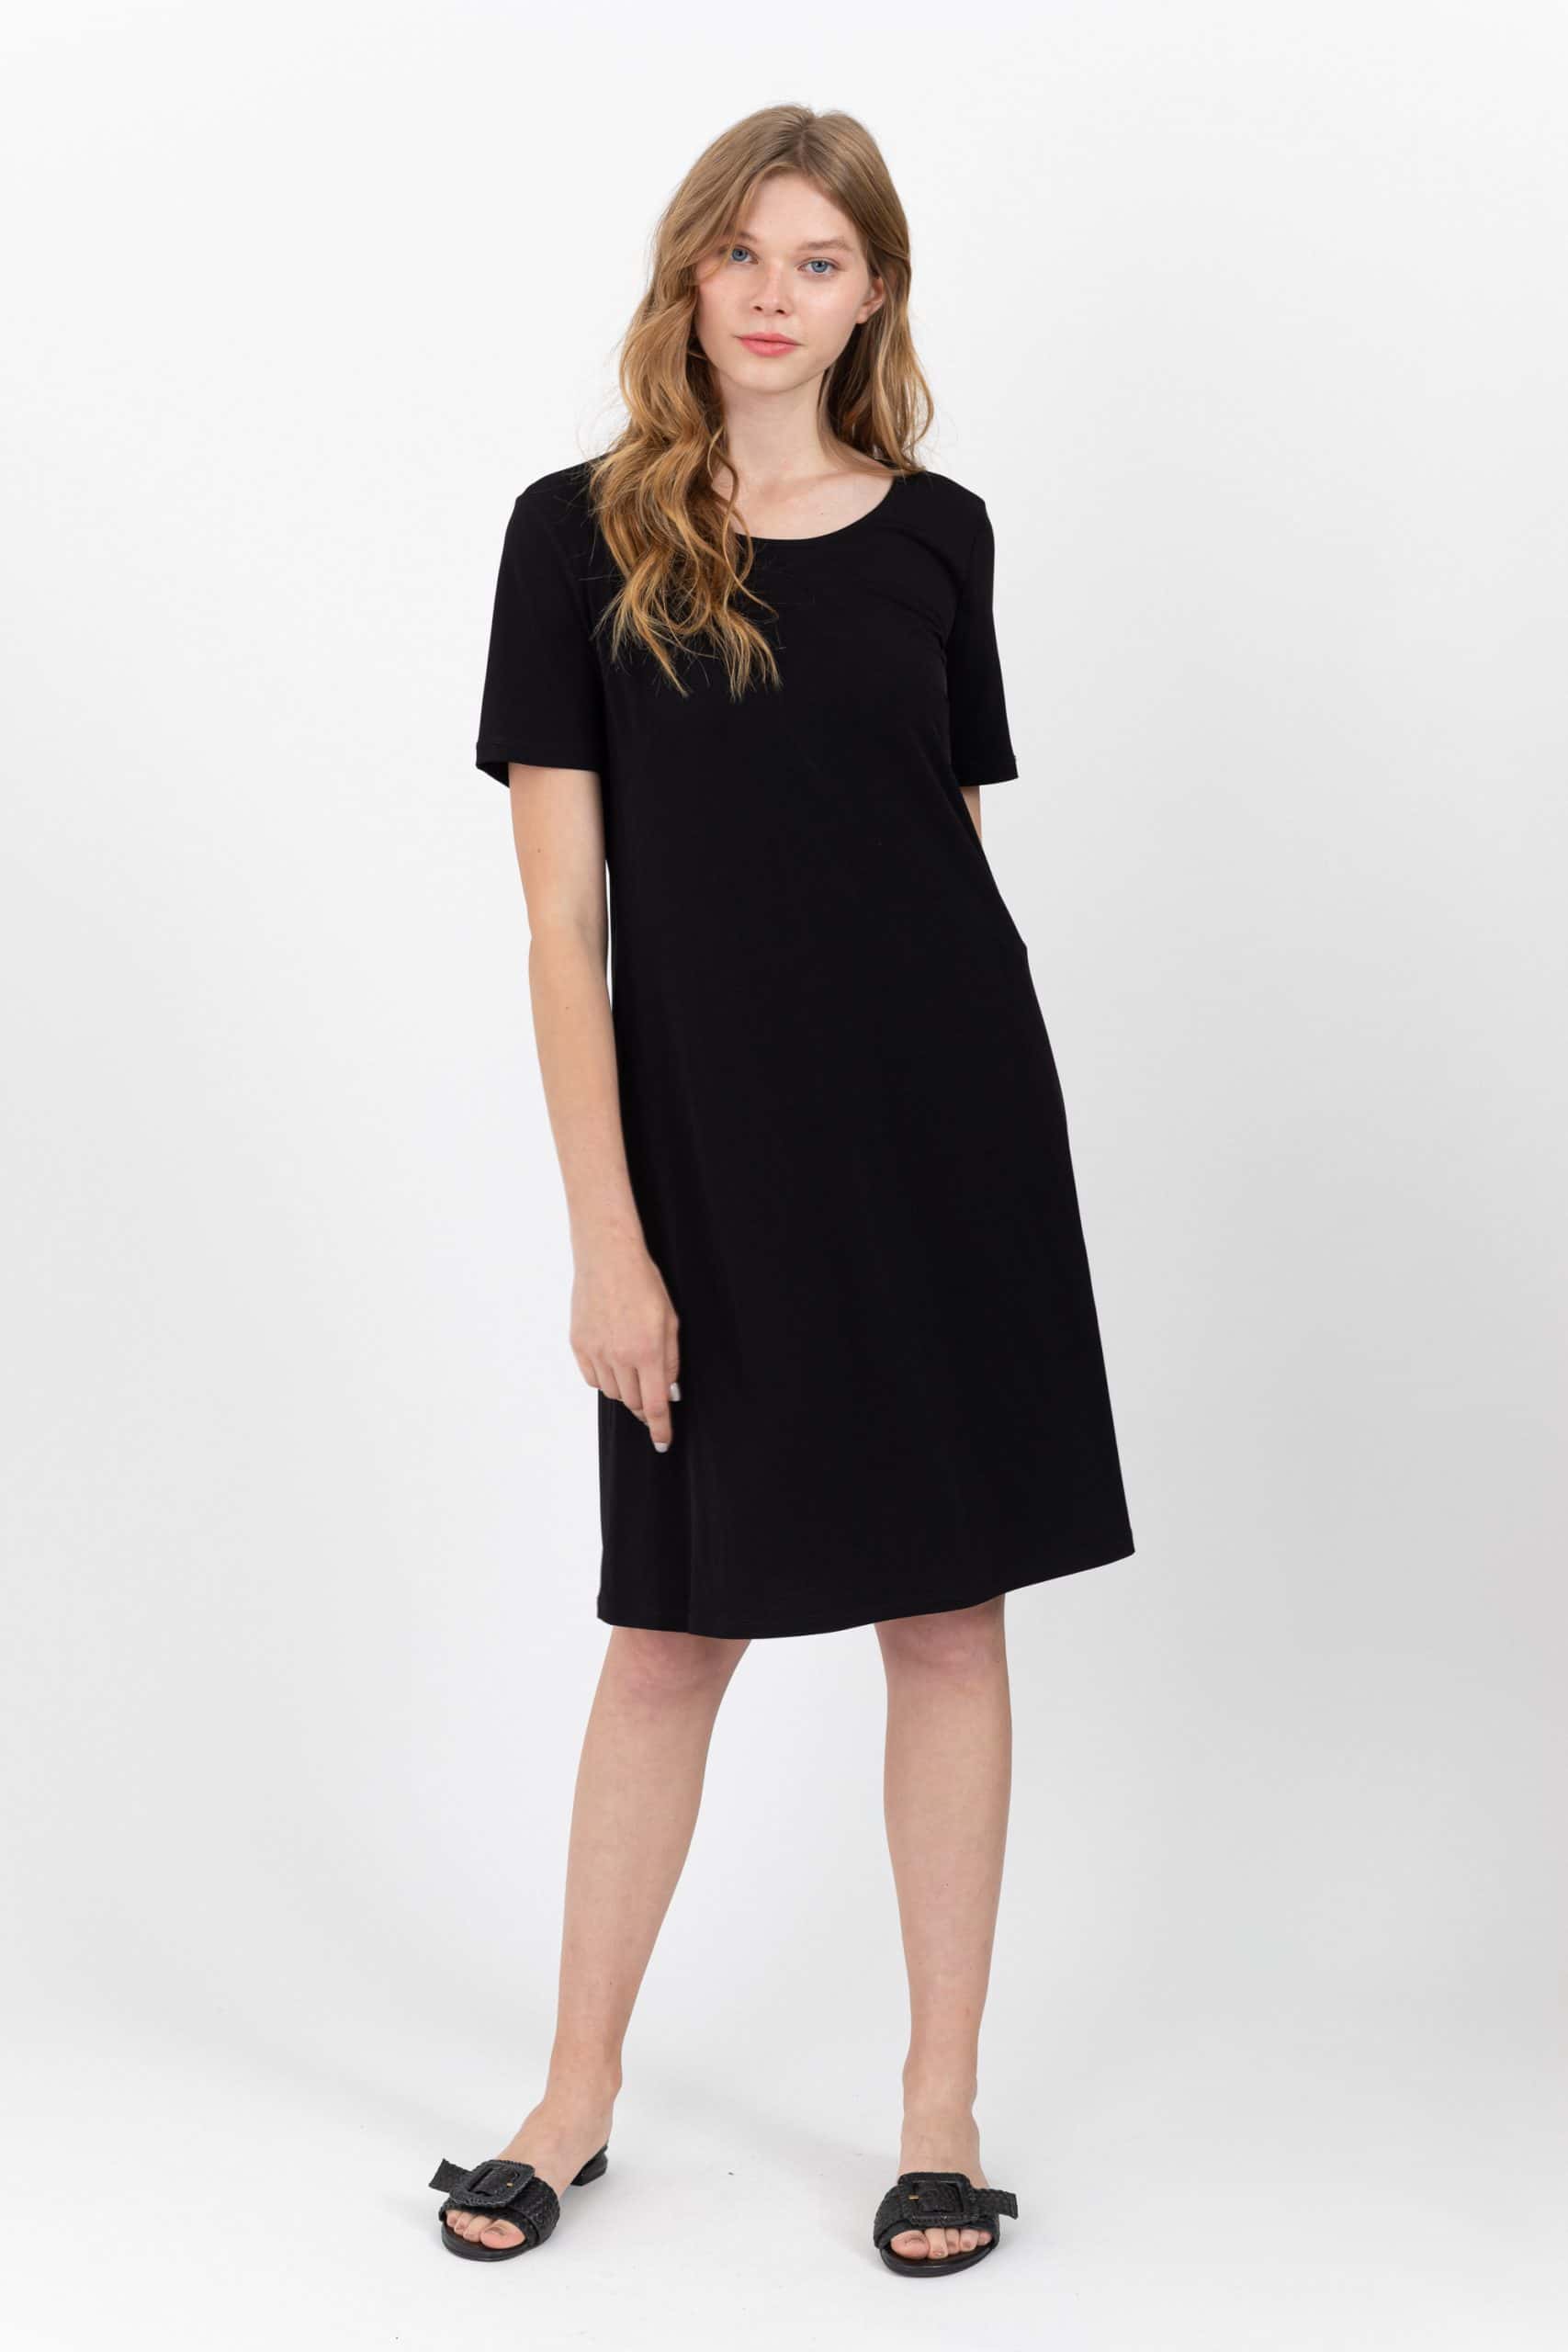 Black casual knee length - Scelle by Linda